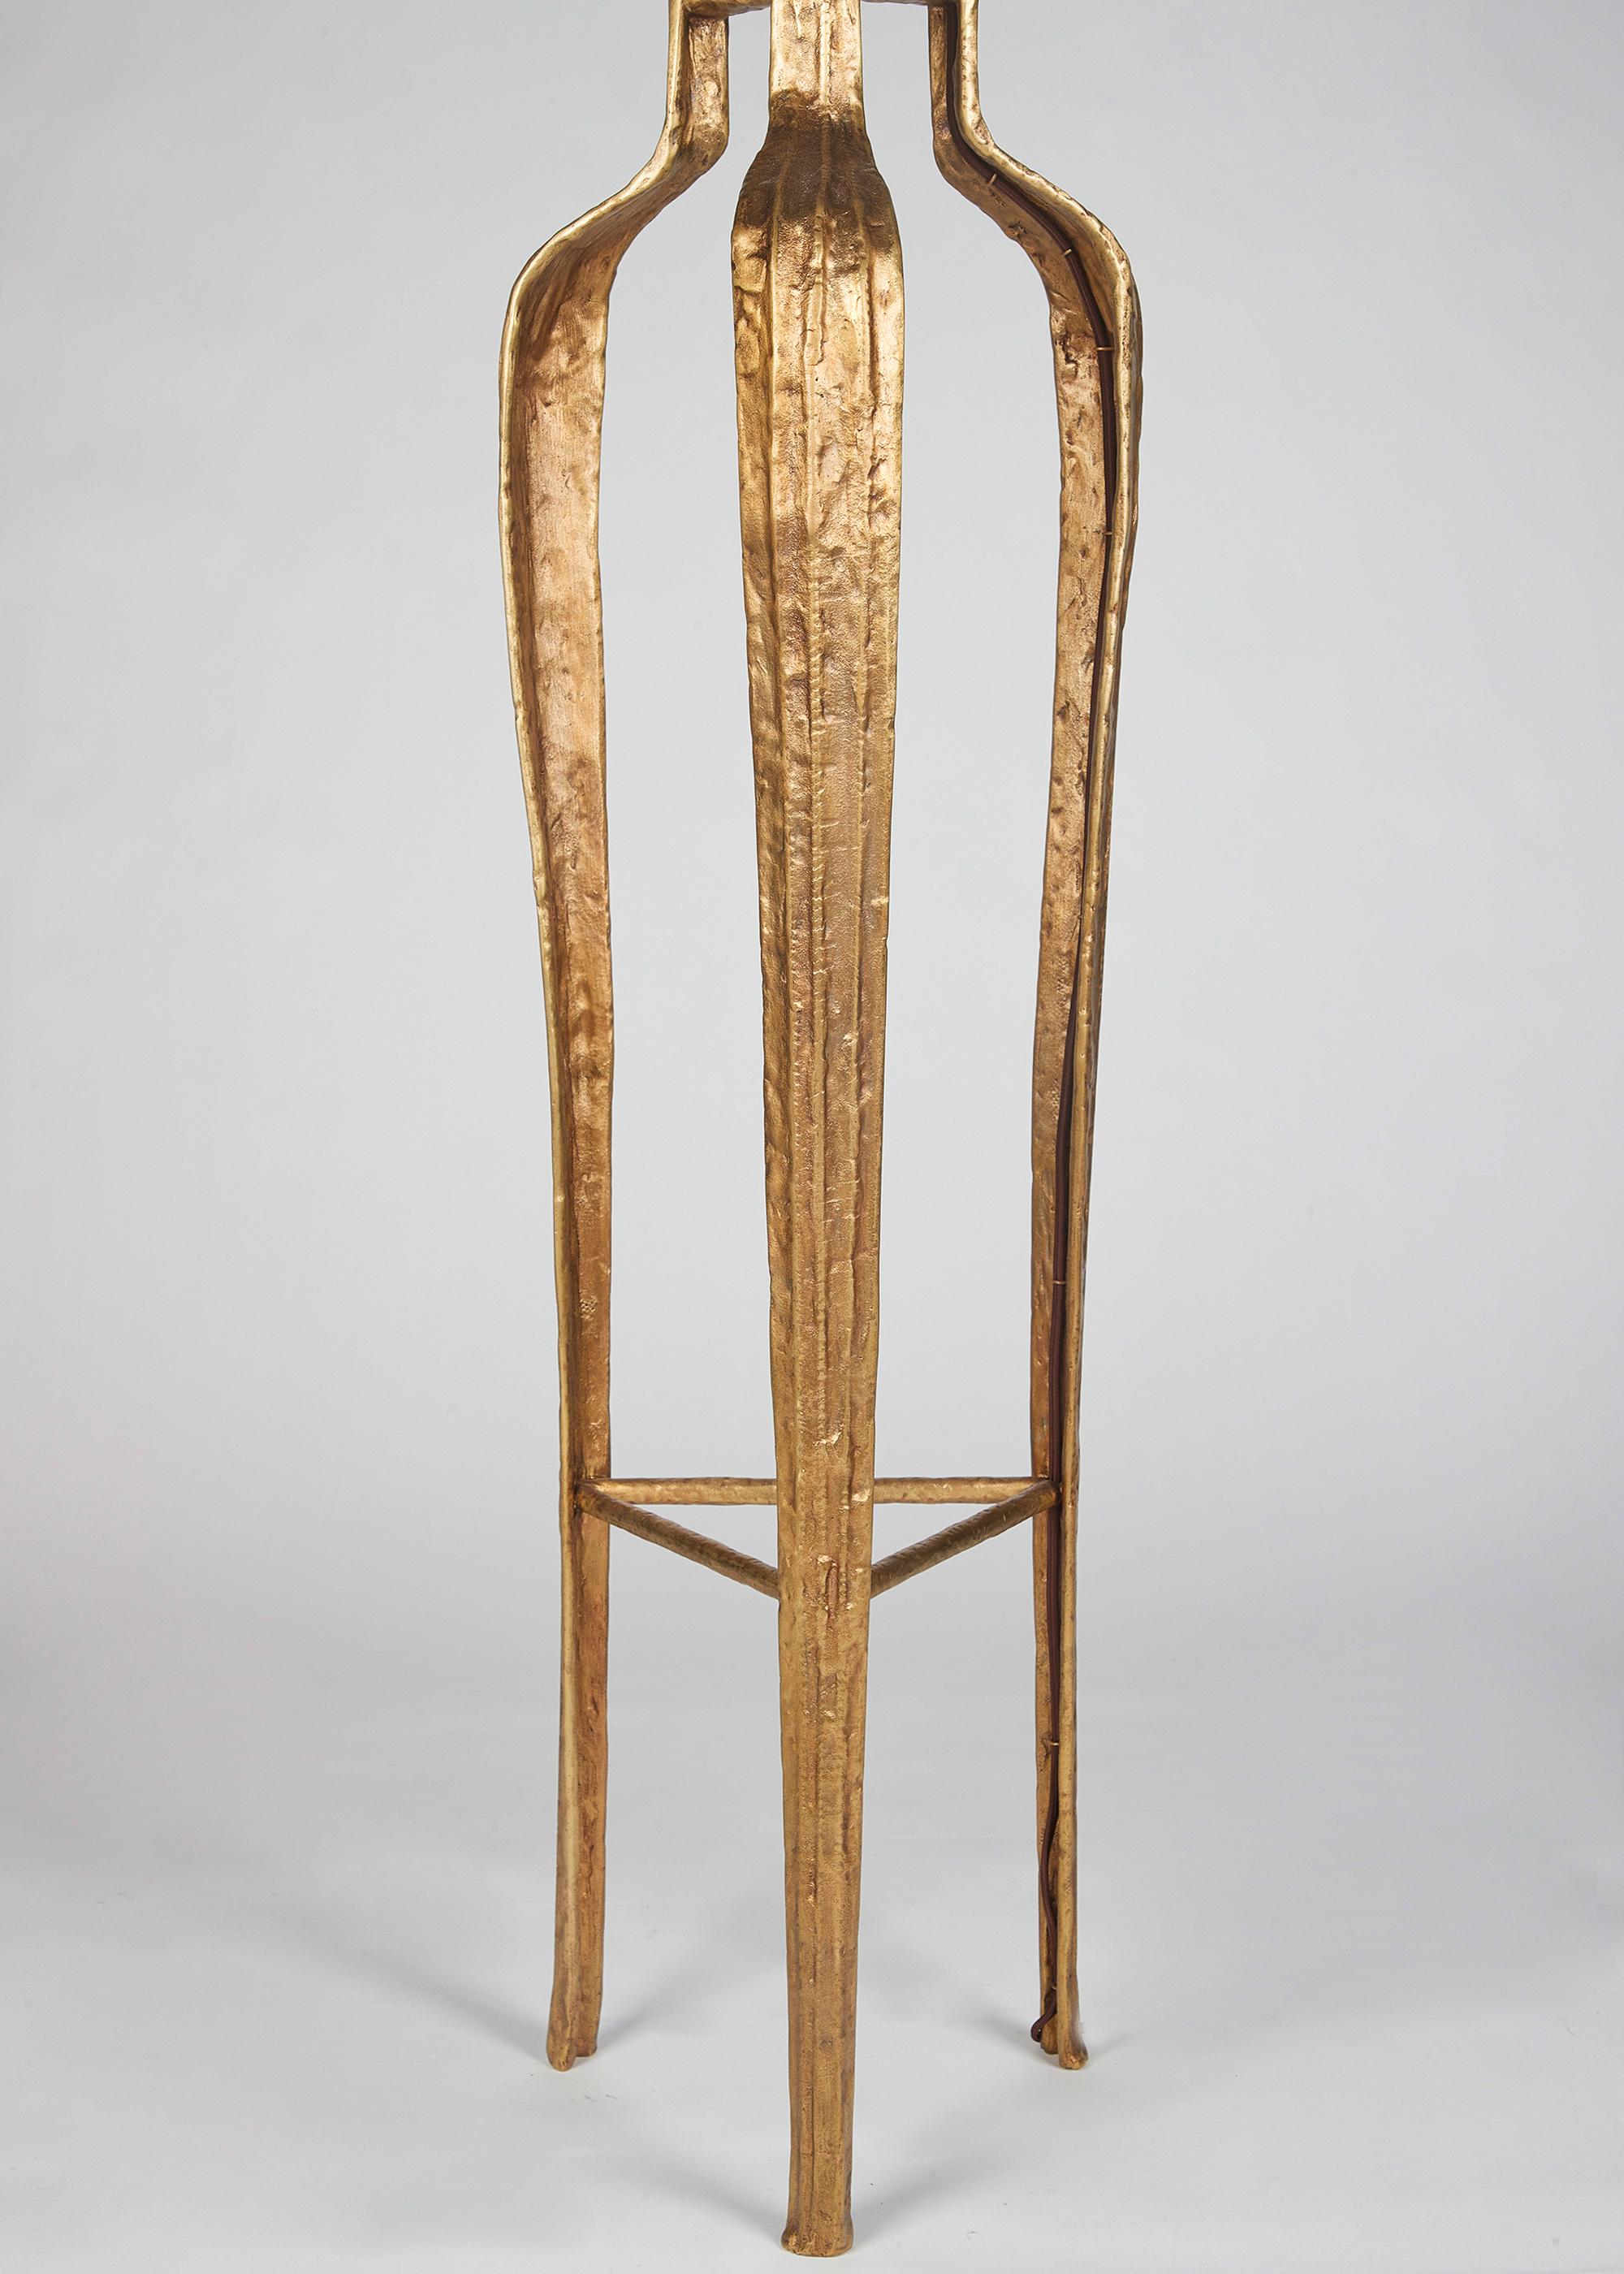 Franck Evennou, Contemporary Bronze and Alabaster Floor Lamp, France, 2020 In Excellent Condition For Sale In New York, NY